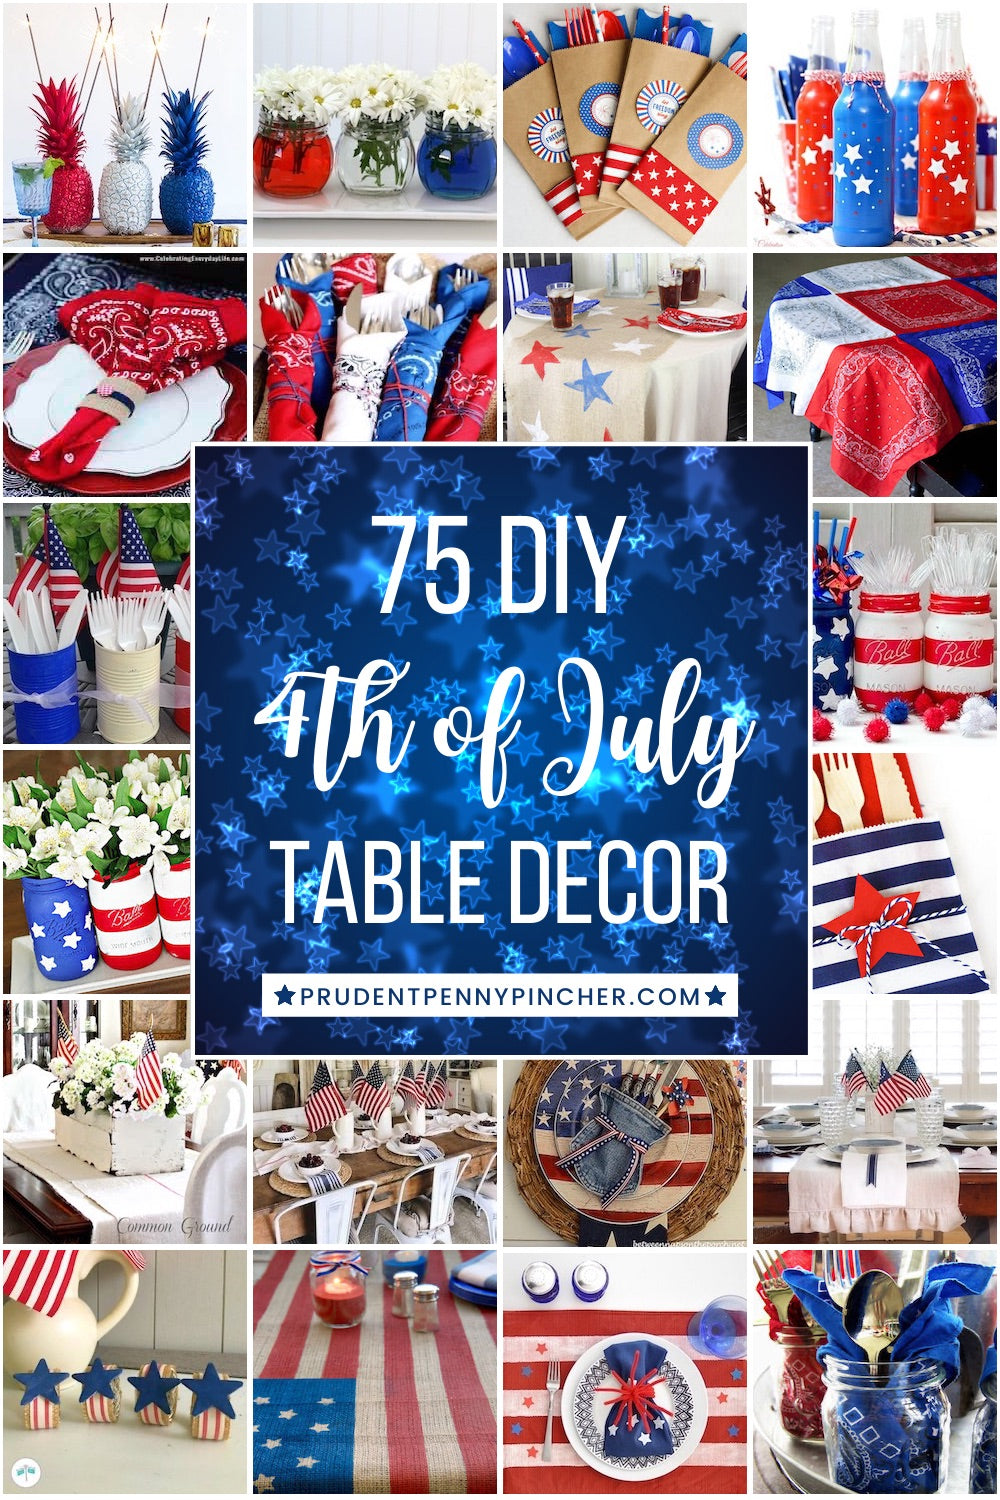 There are 4th of July Table Decorations for patriotic centerpieces, place settings, utensil holders, tablescapes and much more